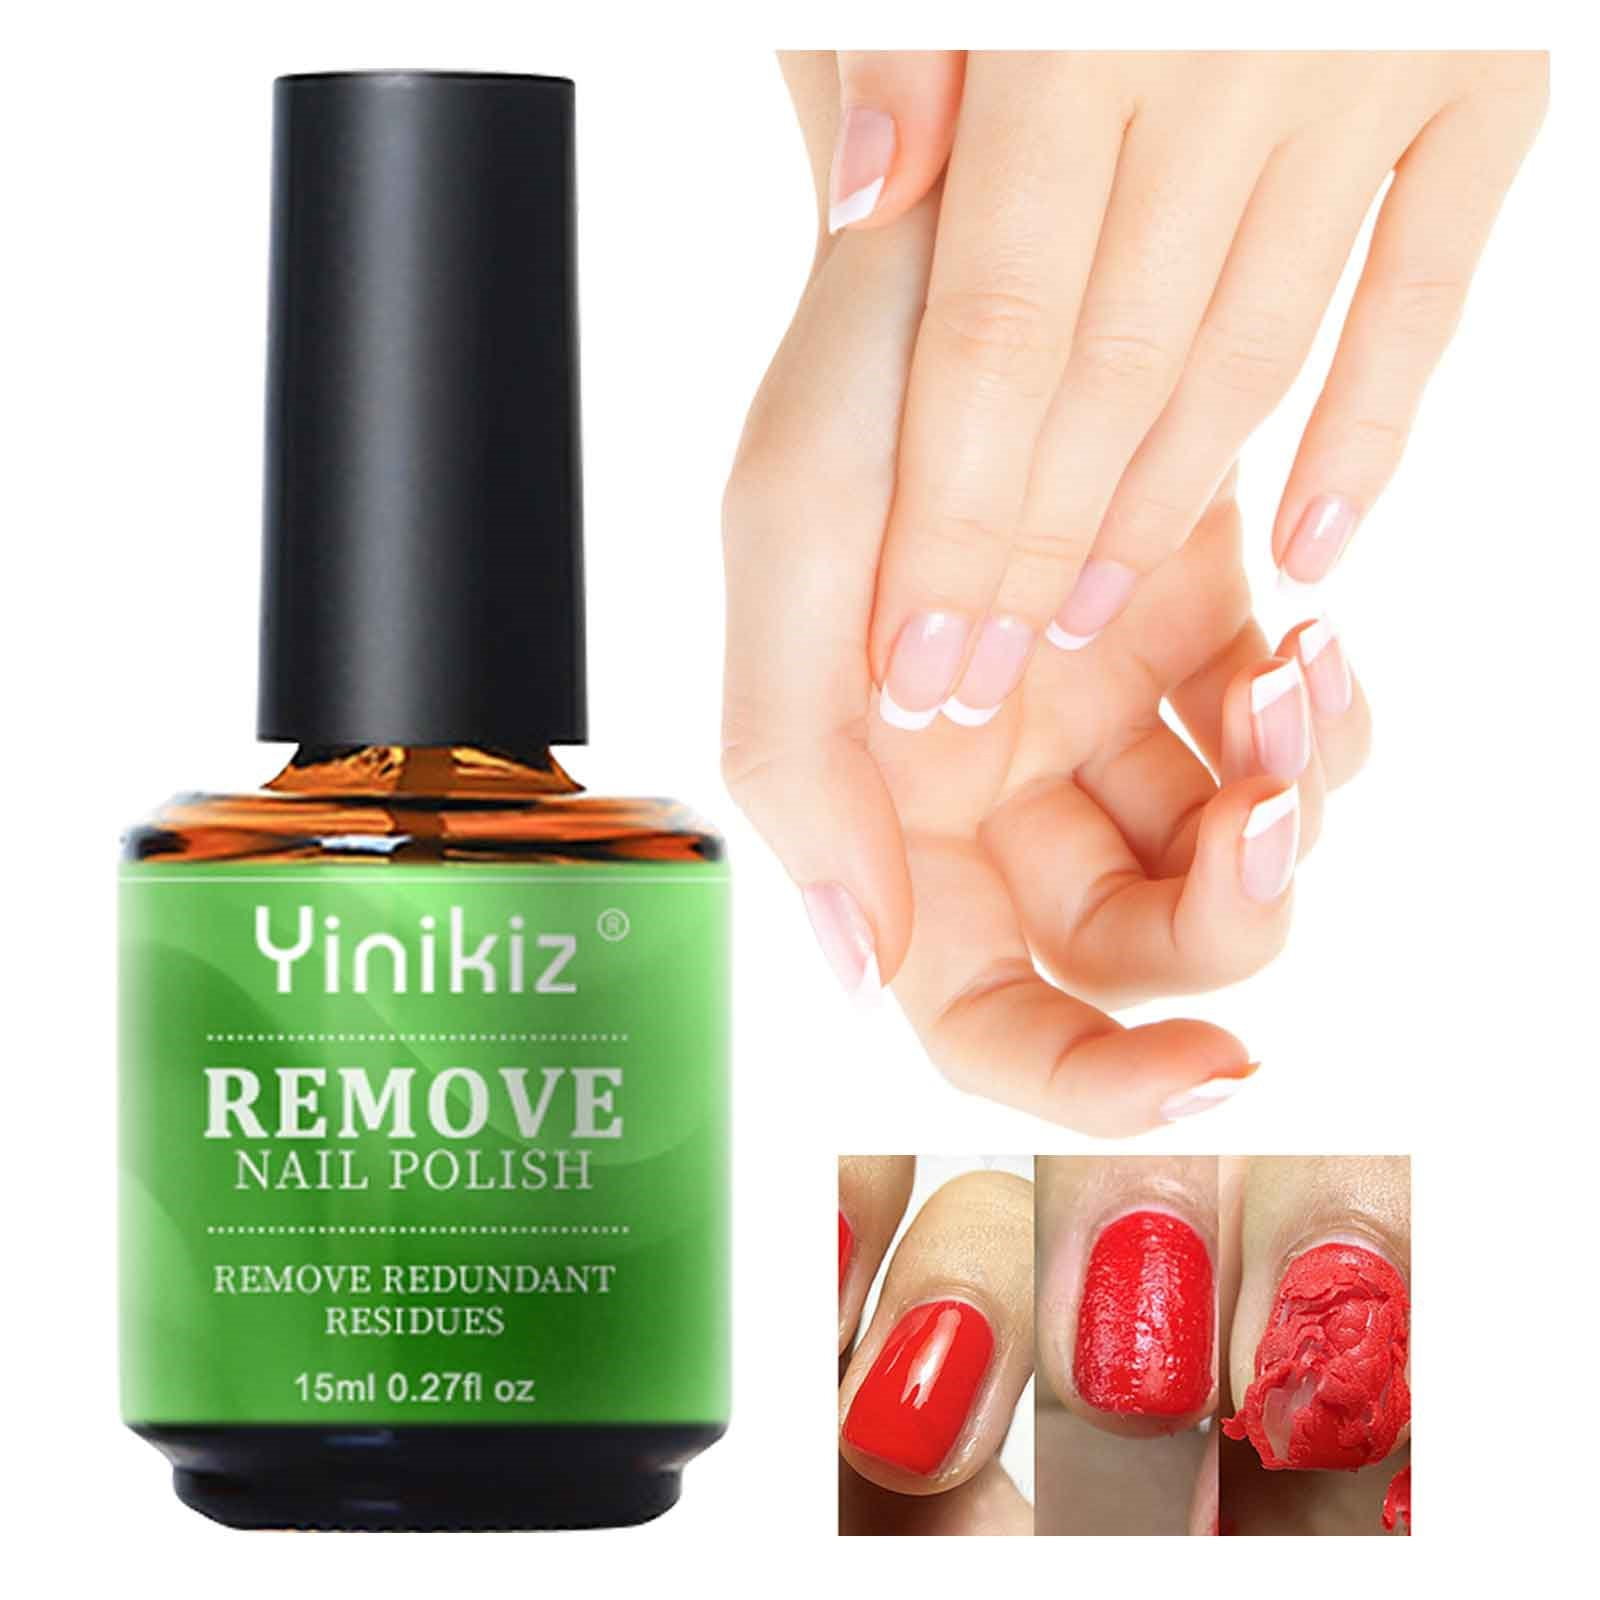 RANORE Gel Polish Remover Gel Soak Off UV Gel Nail Cleaner Within 2-3  Minites transparent - Price in India, Buy RANORE Gel Polish Remover Gel  Soak Off UV Gel Nail Cleaner Within